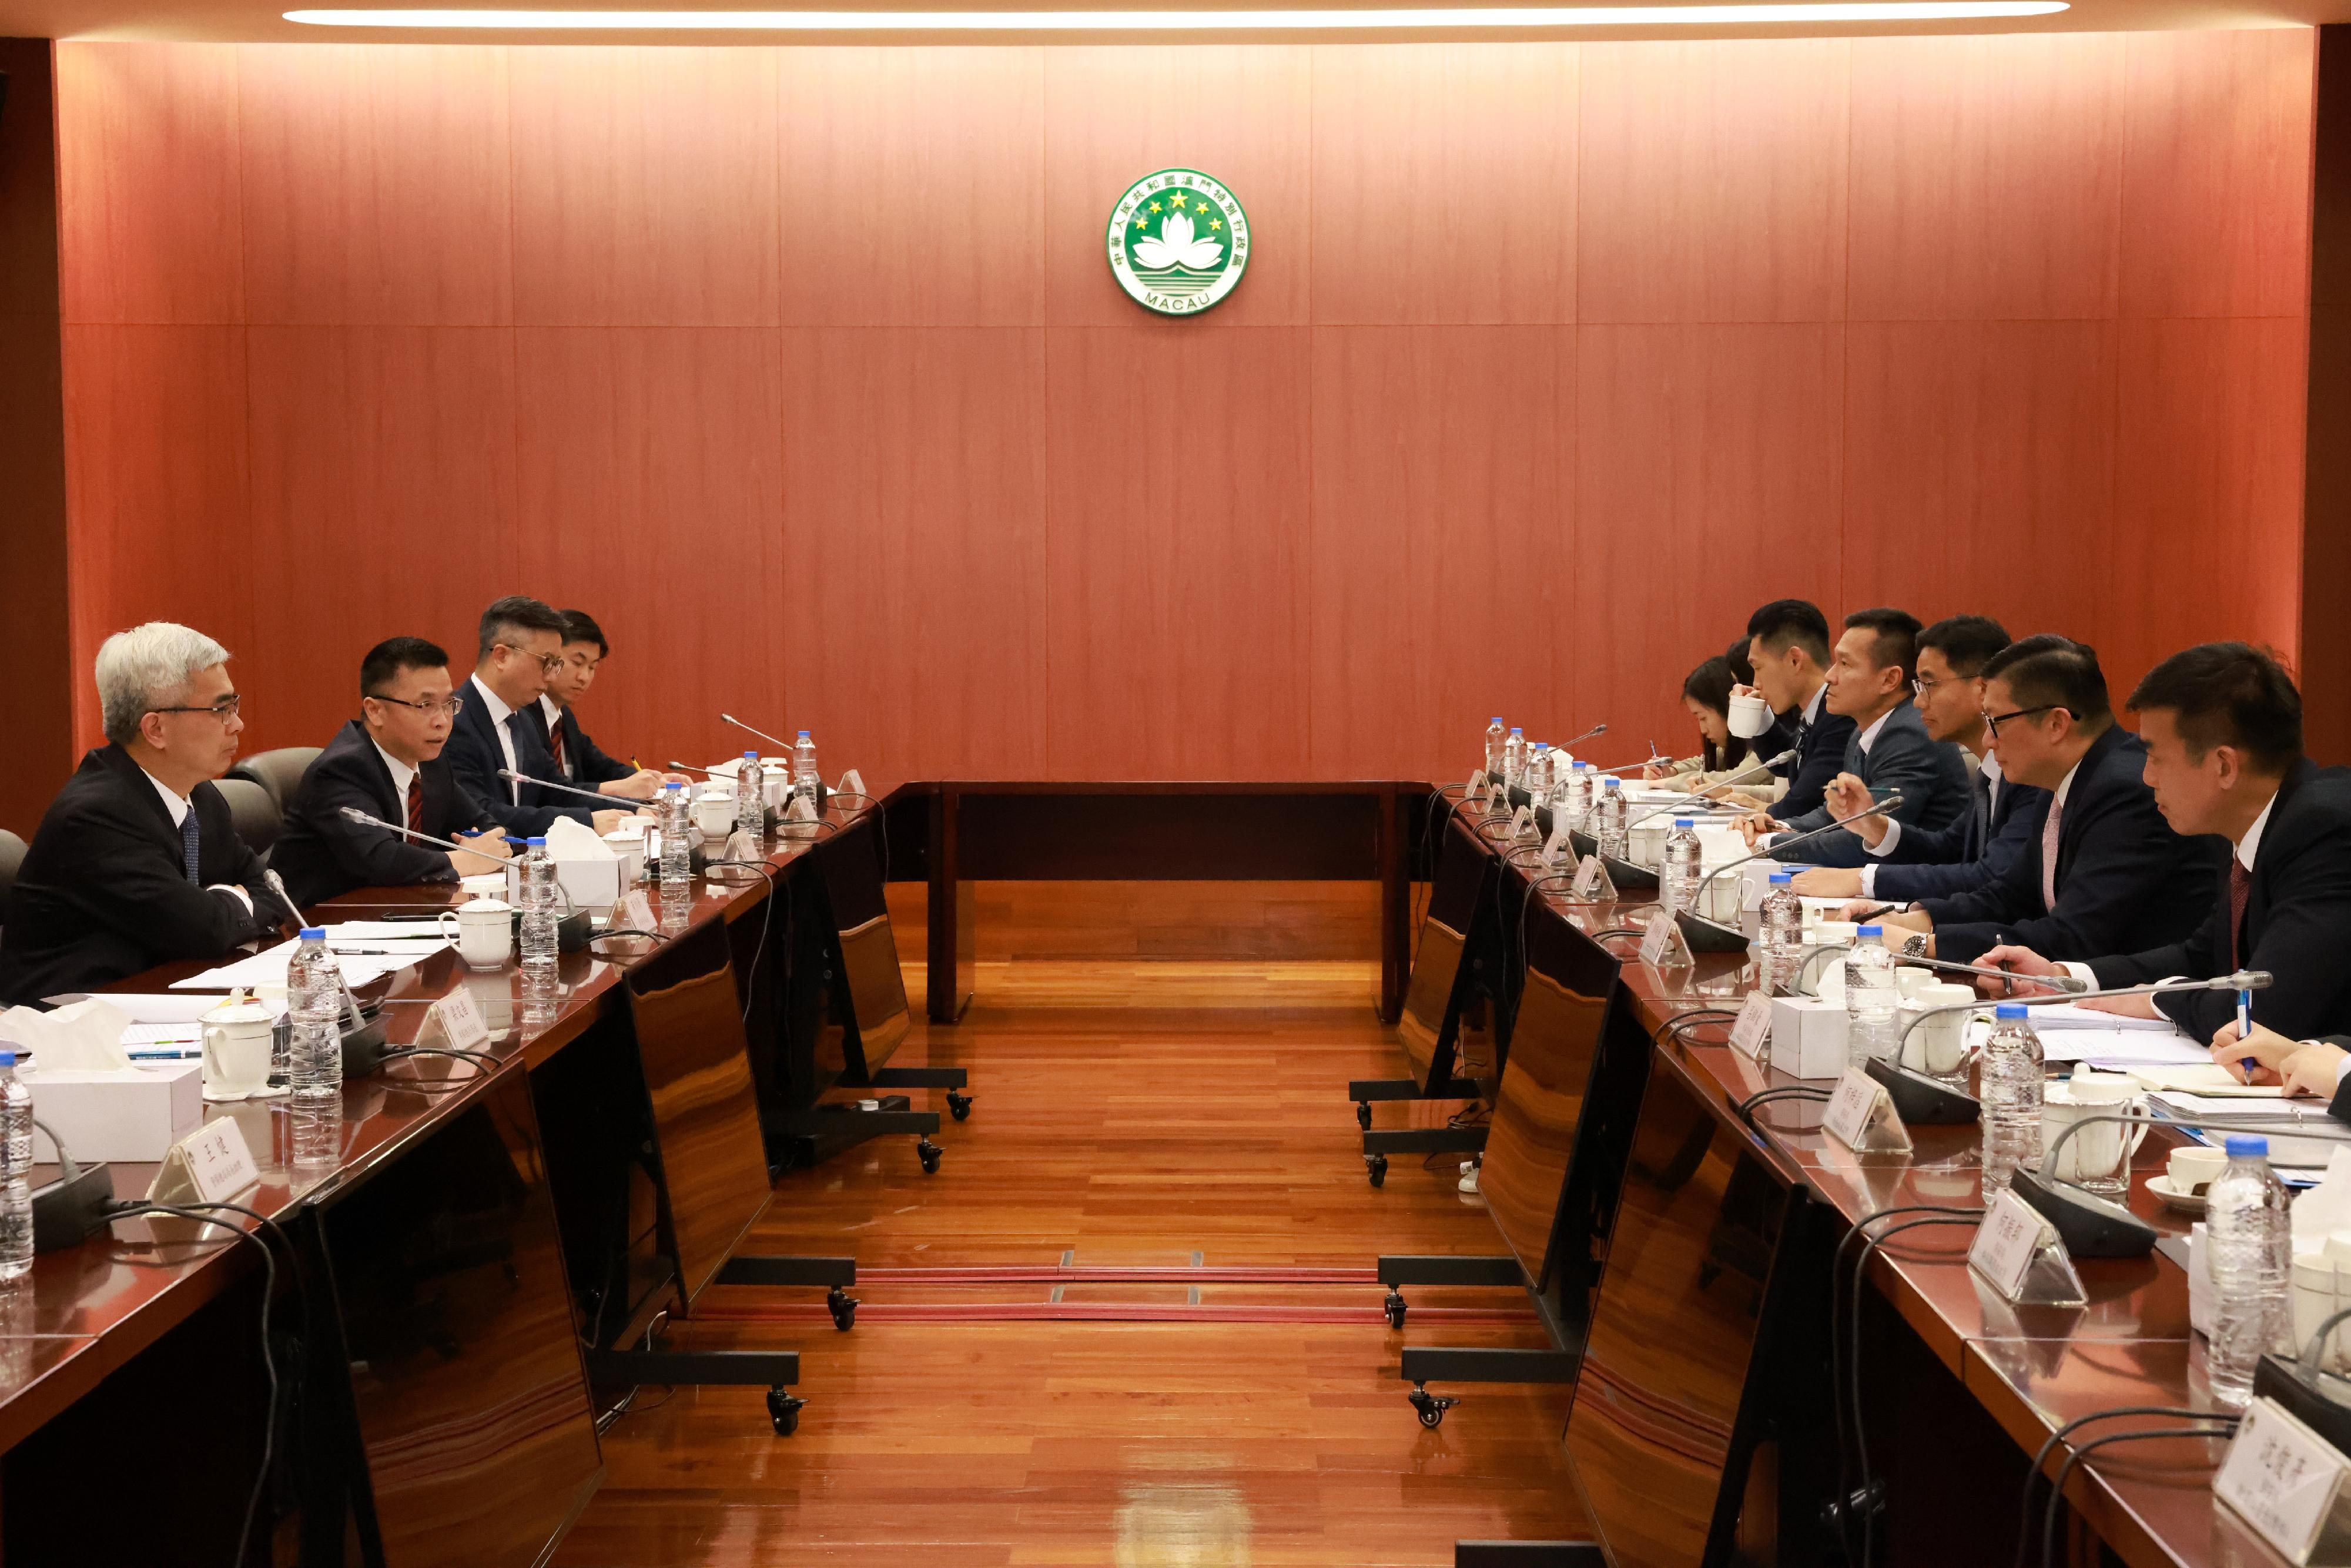 The Secretary for Security, Mr Tang Ping-keung, arrived in Macao this morning (June 20) to start his two-day visit to the Guangdong-Hong Kong-Macao Greater Bay Area and call on public security units there. Photo shows Mr Tang (second right) calling on the Secretariat for Security of Macao.